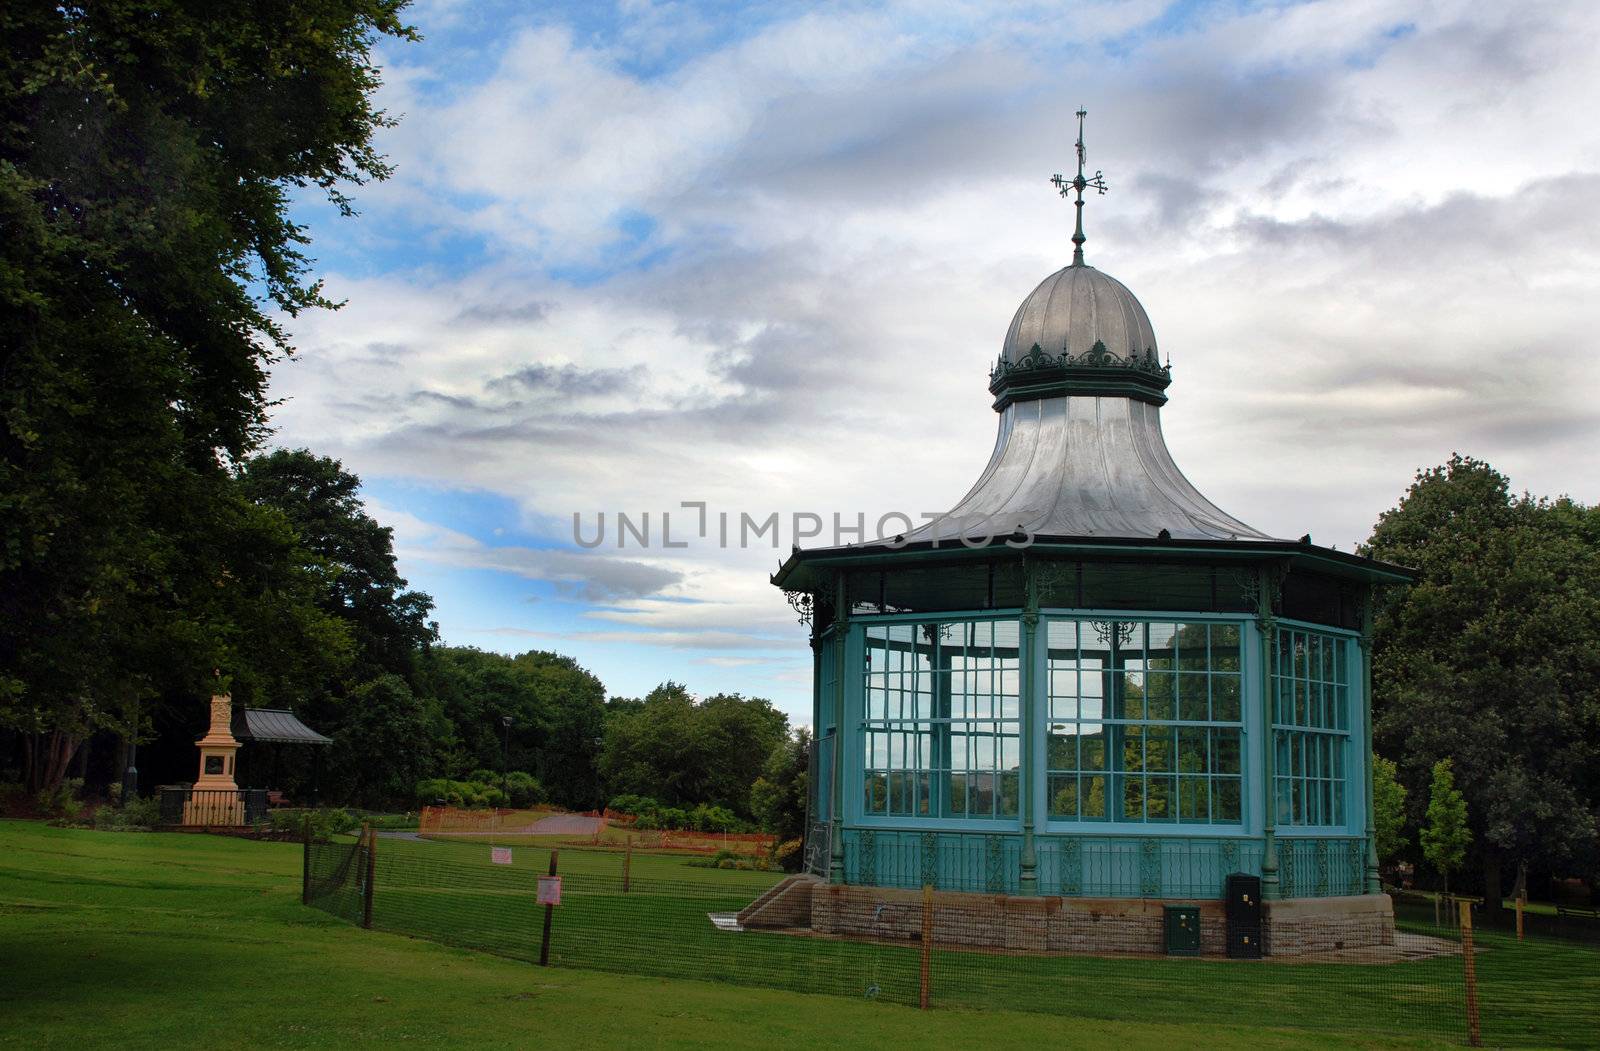 A photograph of a bandstand in a public park, under a stormy summer sky